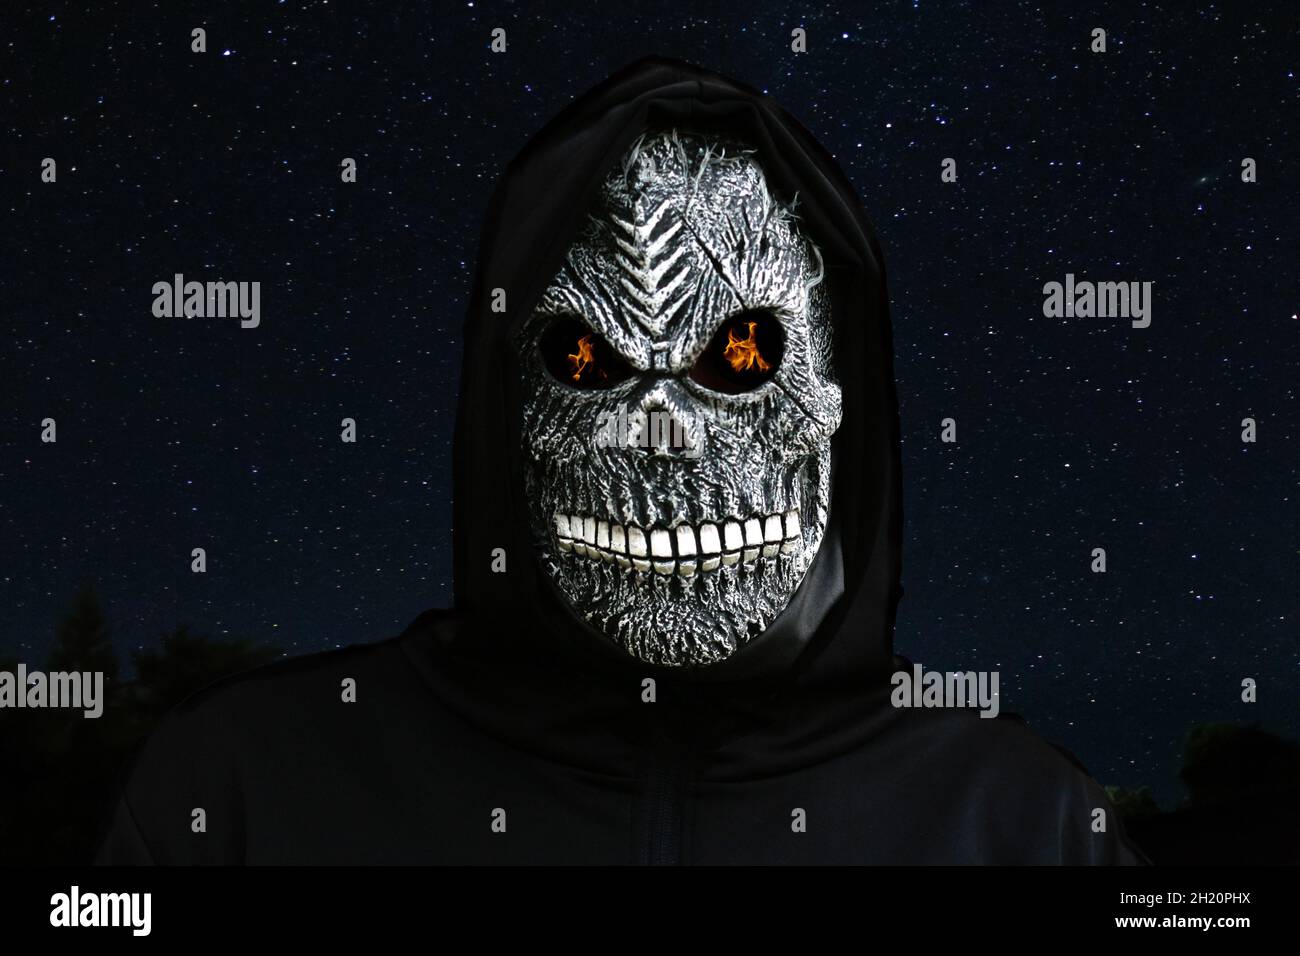 Close-up portrait of grim reaper. Man in death mask with fire flame in eyes on night sky starry. Carnival costume, creepy teeth. Halloween holiday Stock Photo